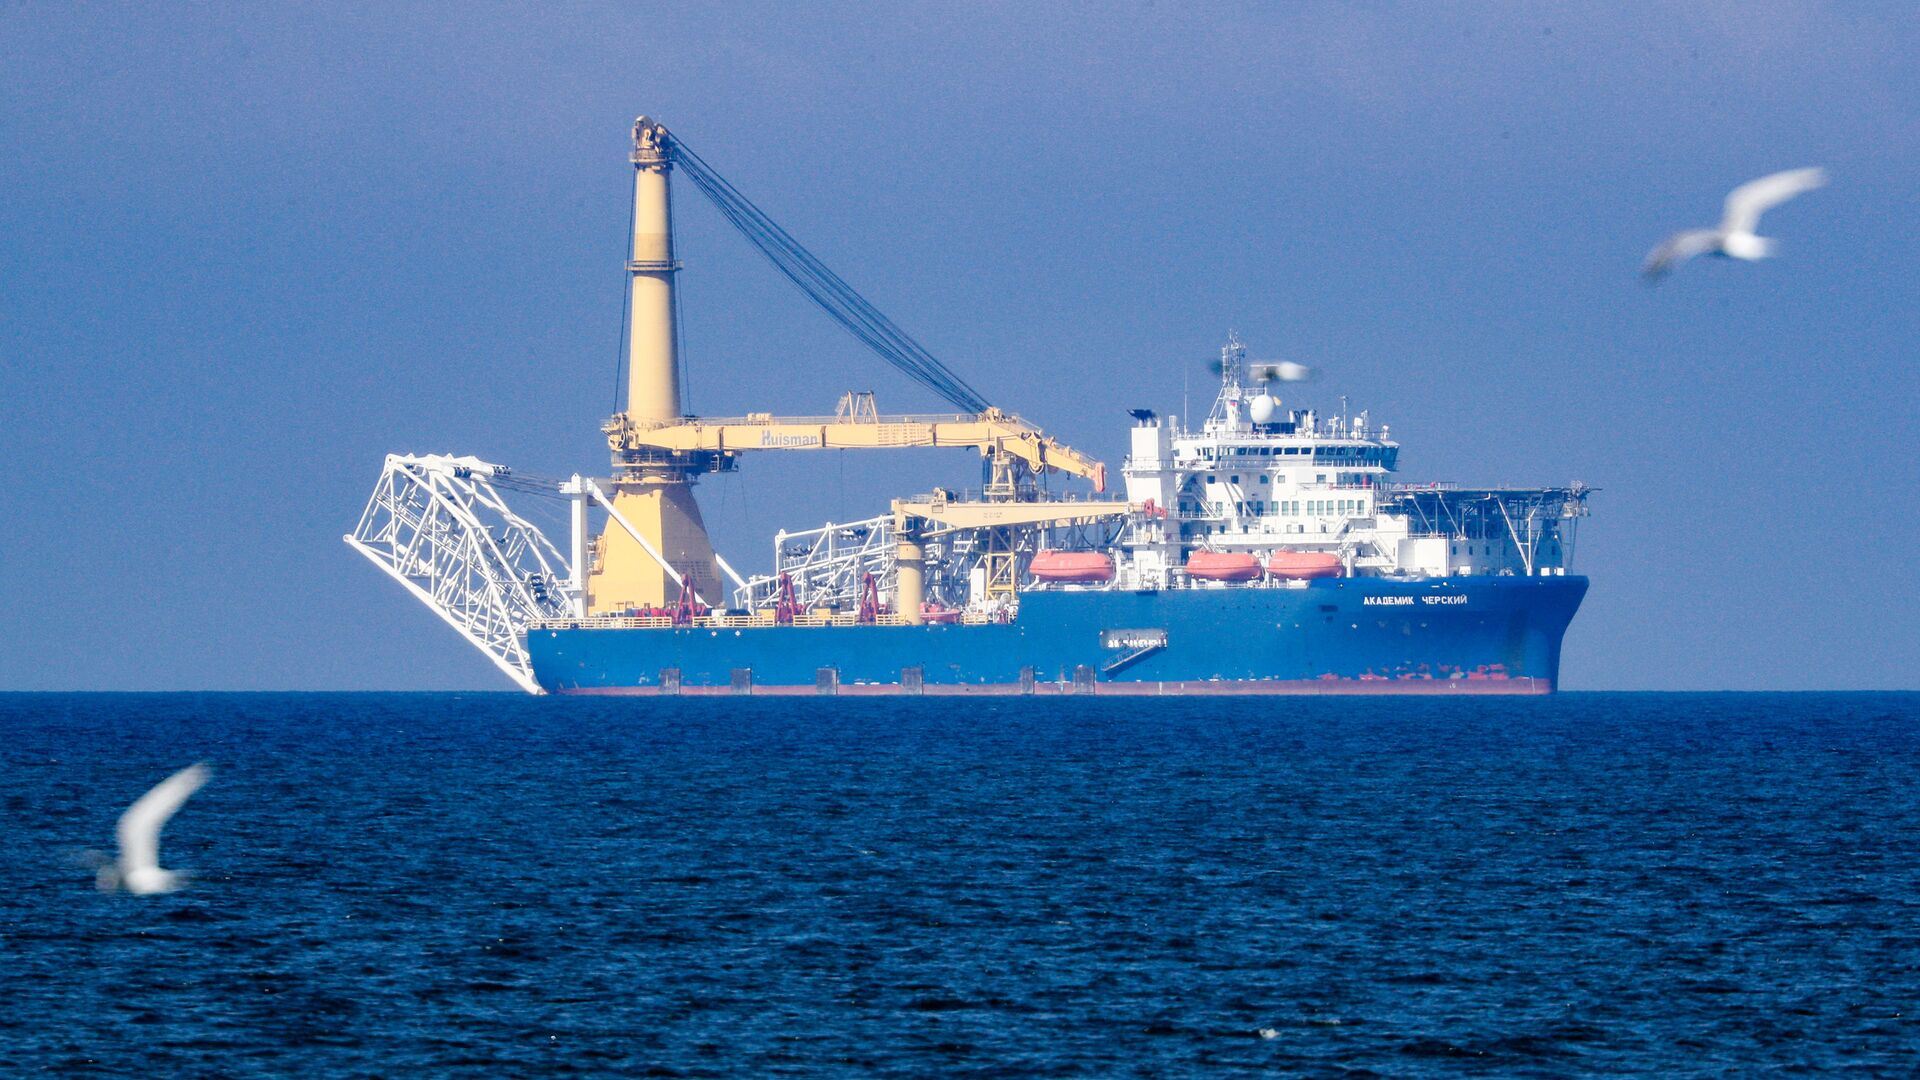 The Russian pipe-laying vessel Akademik Cherskiy is pictured in the waters of Kaliningrad, Russia. The Akademik Cherskiy is capable of completing the construction of the Nord Stream 2 gas pipeline. - Sputnik International, 1920, 27.04.2021